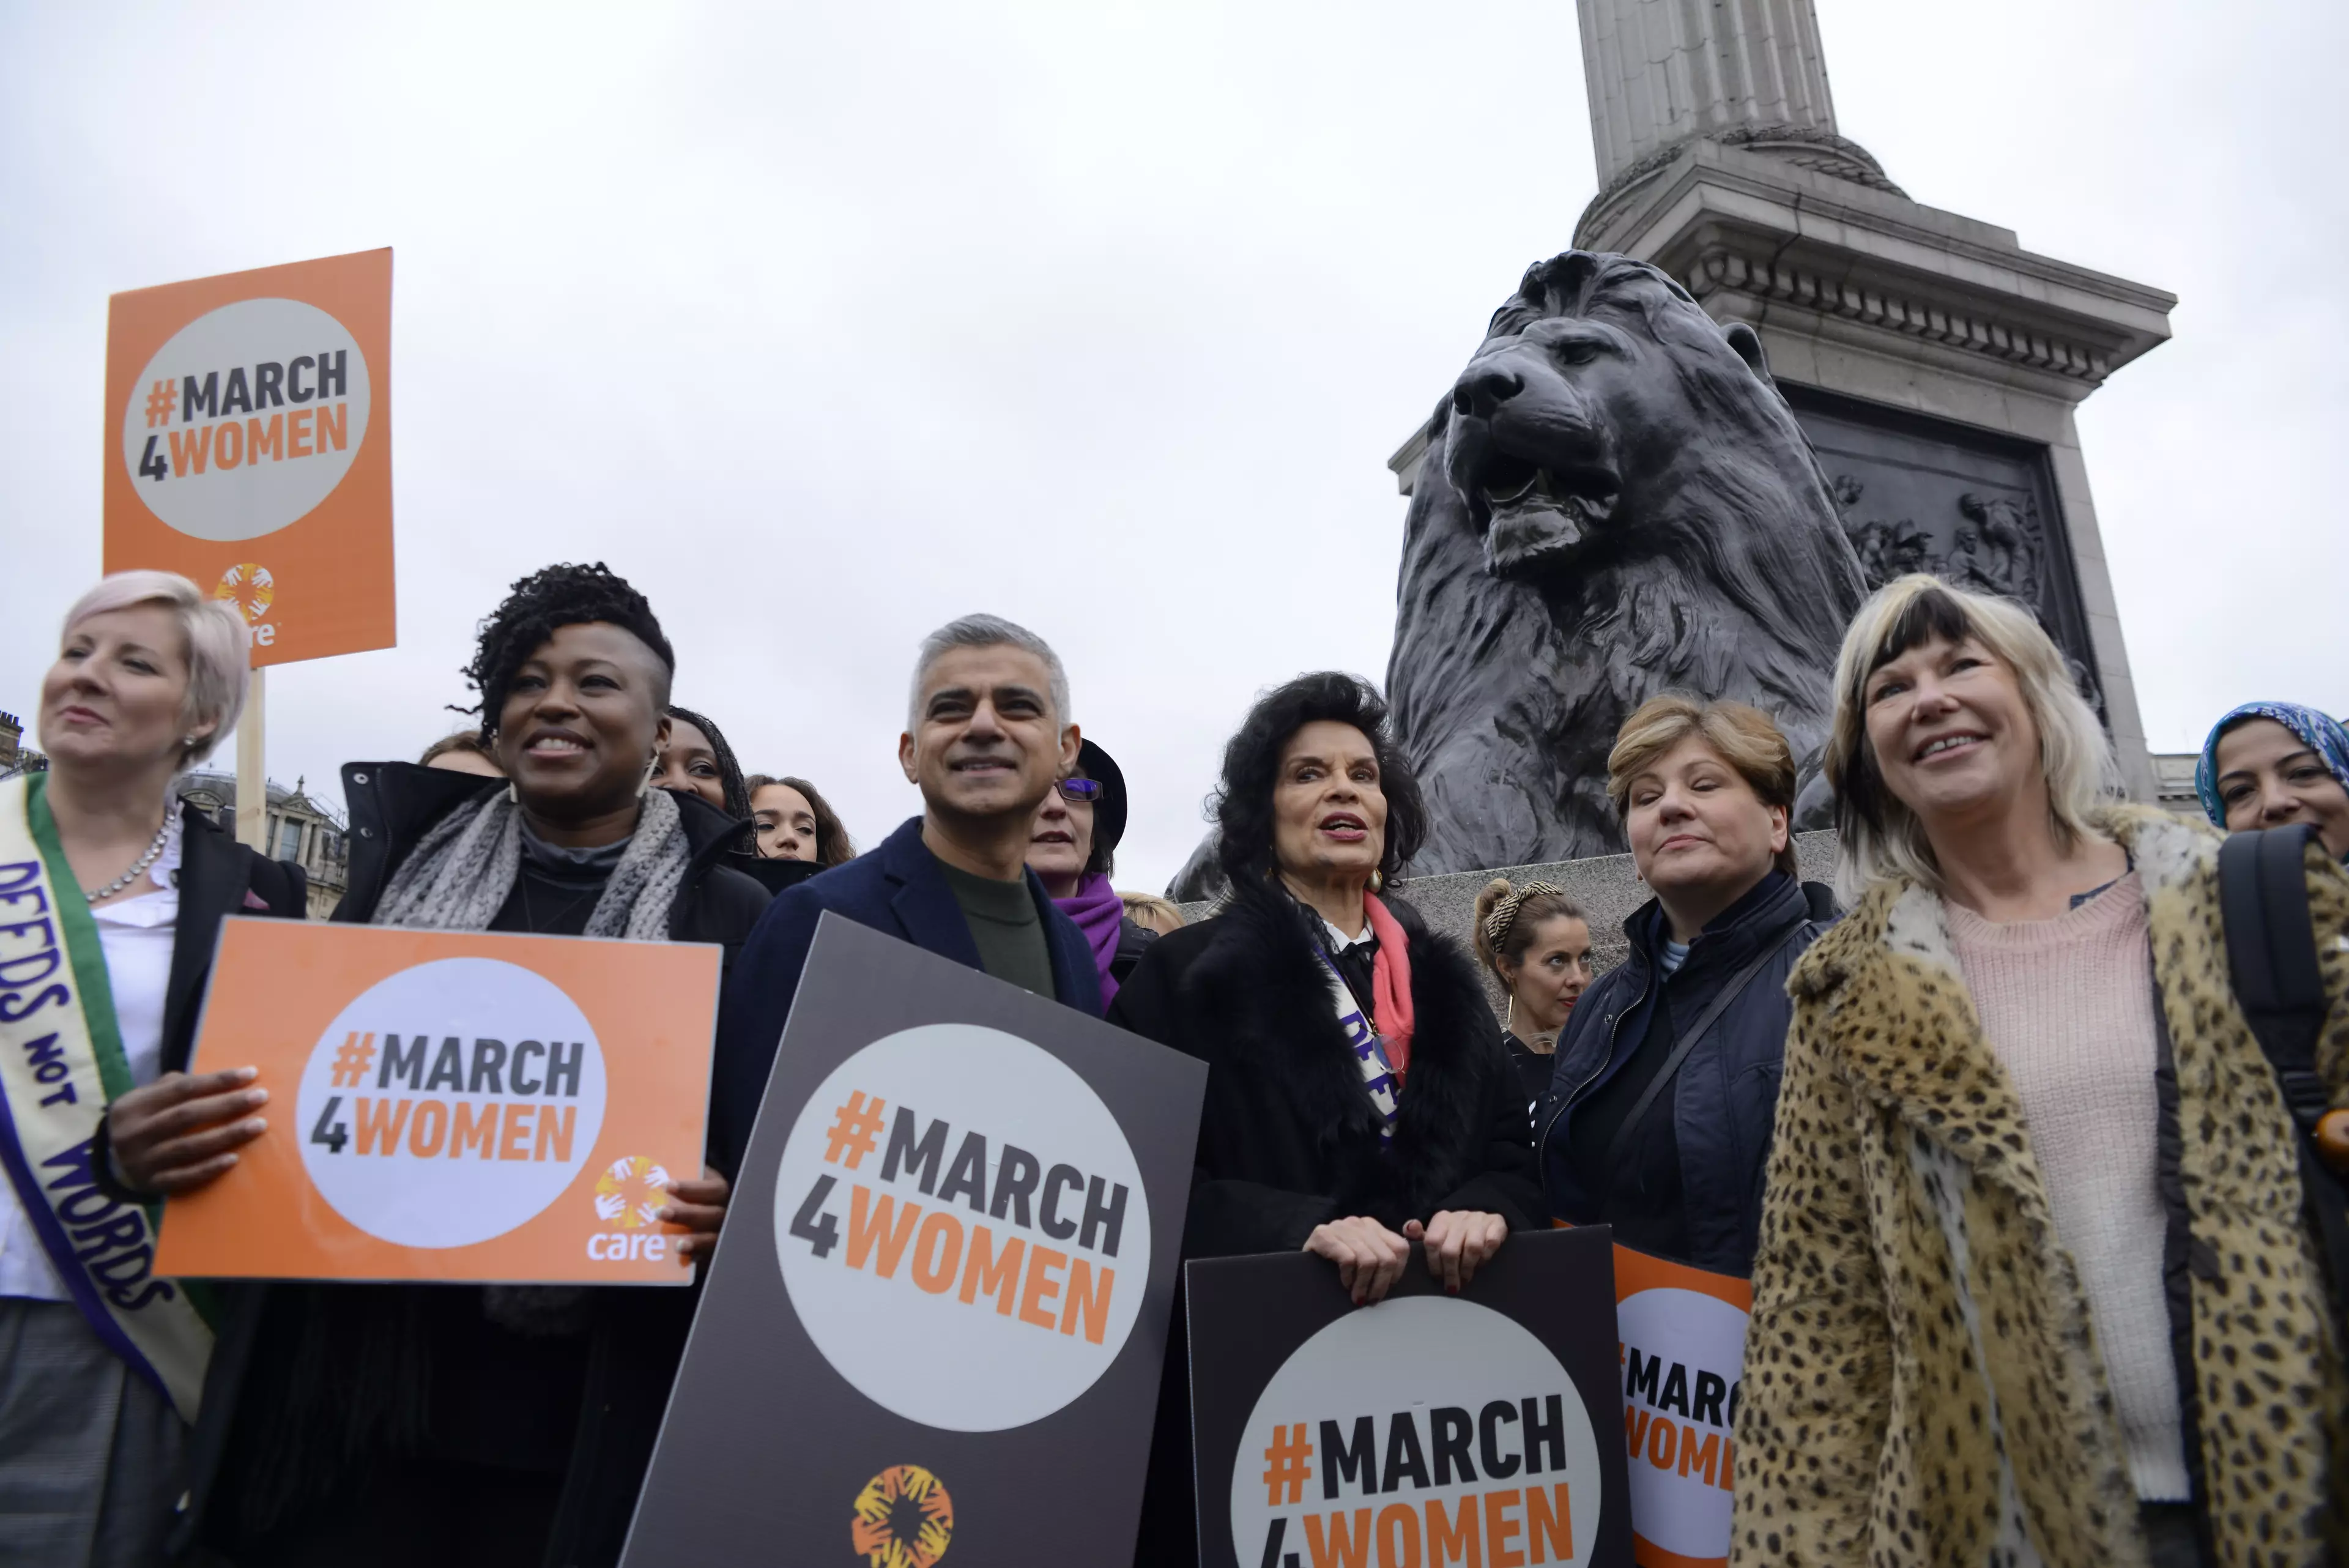 #March4Rally in London earlier this year.